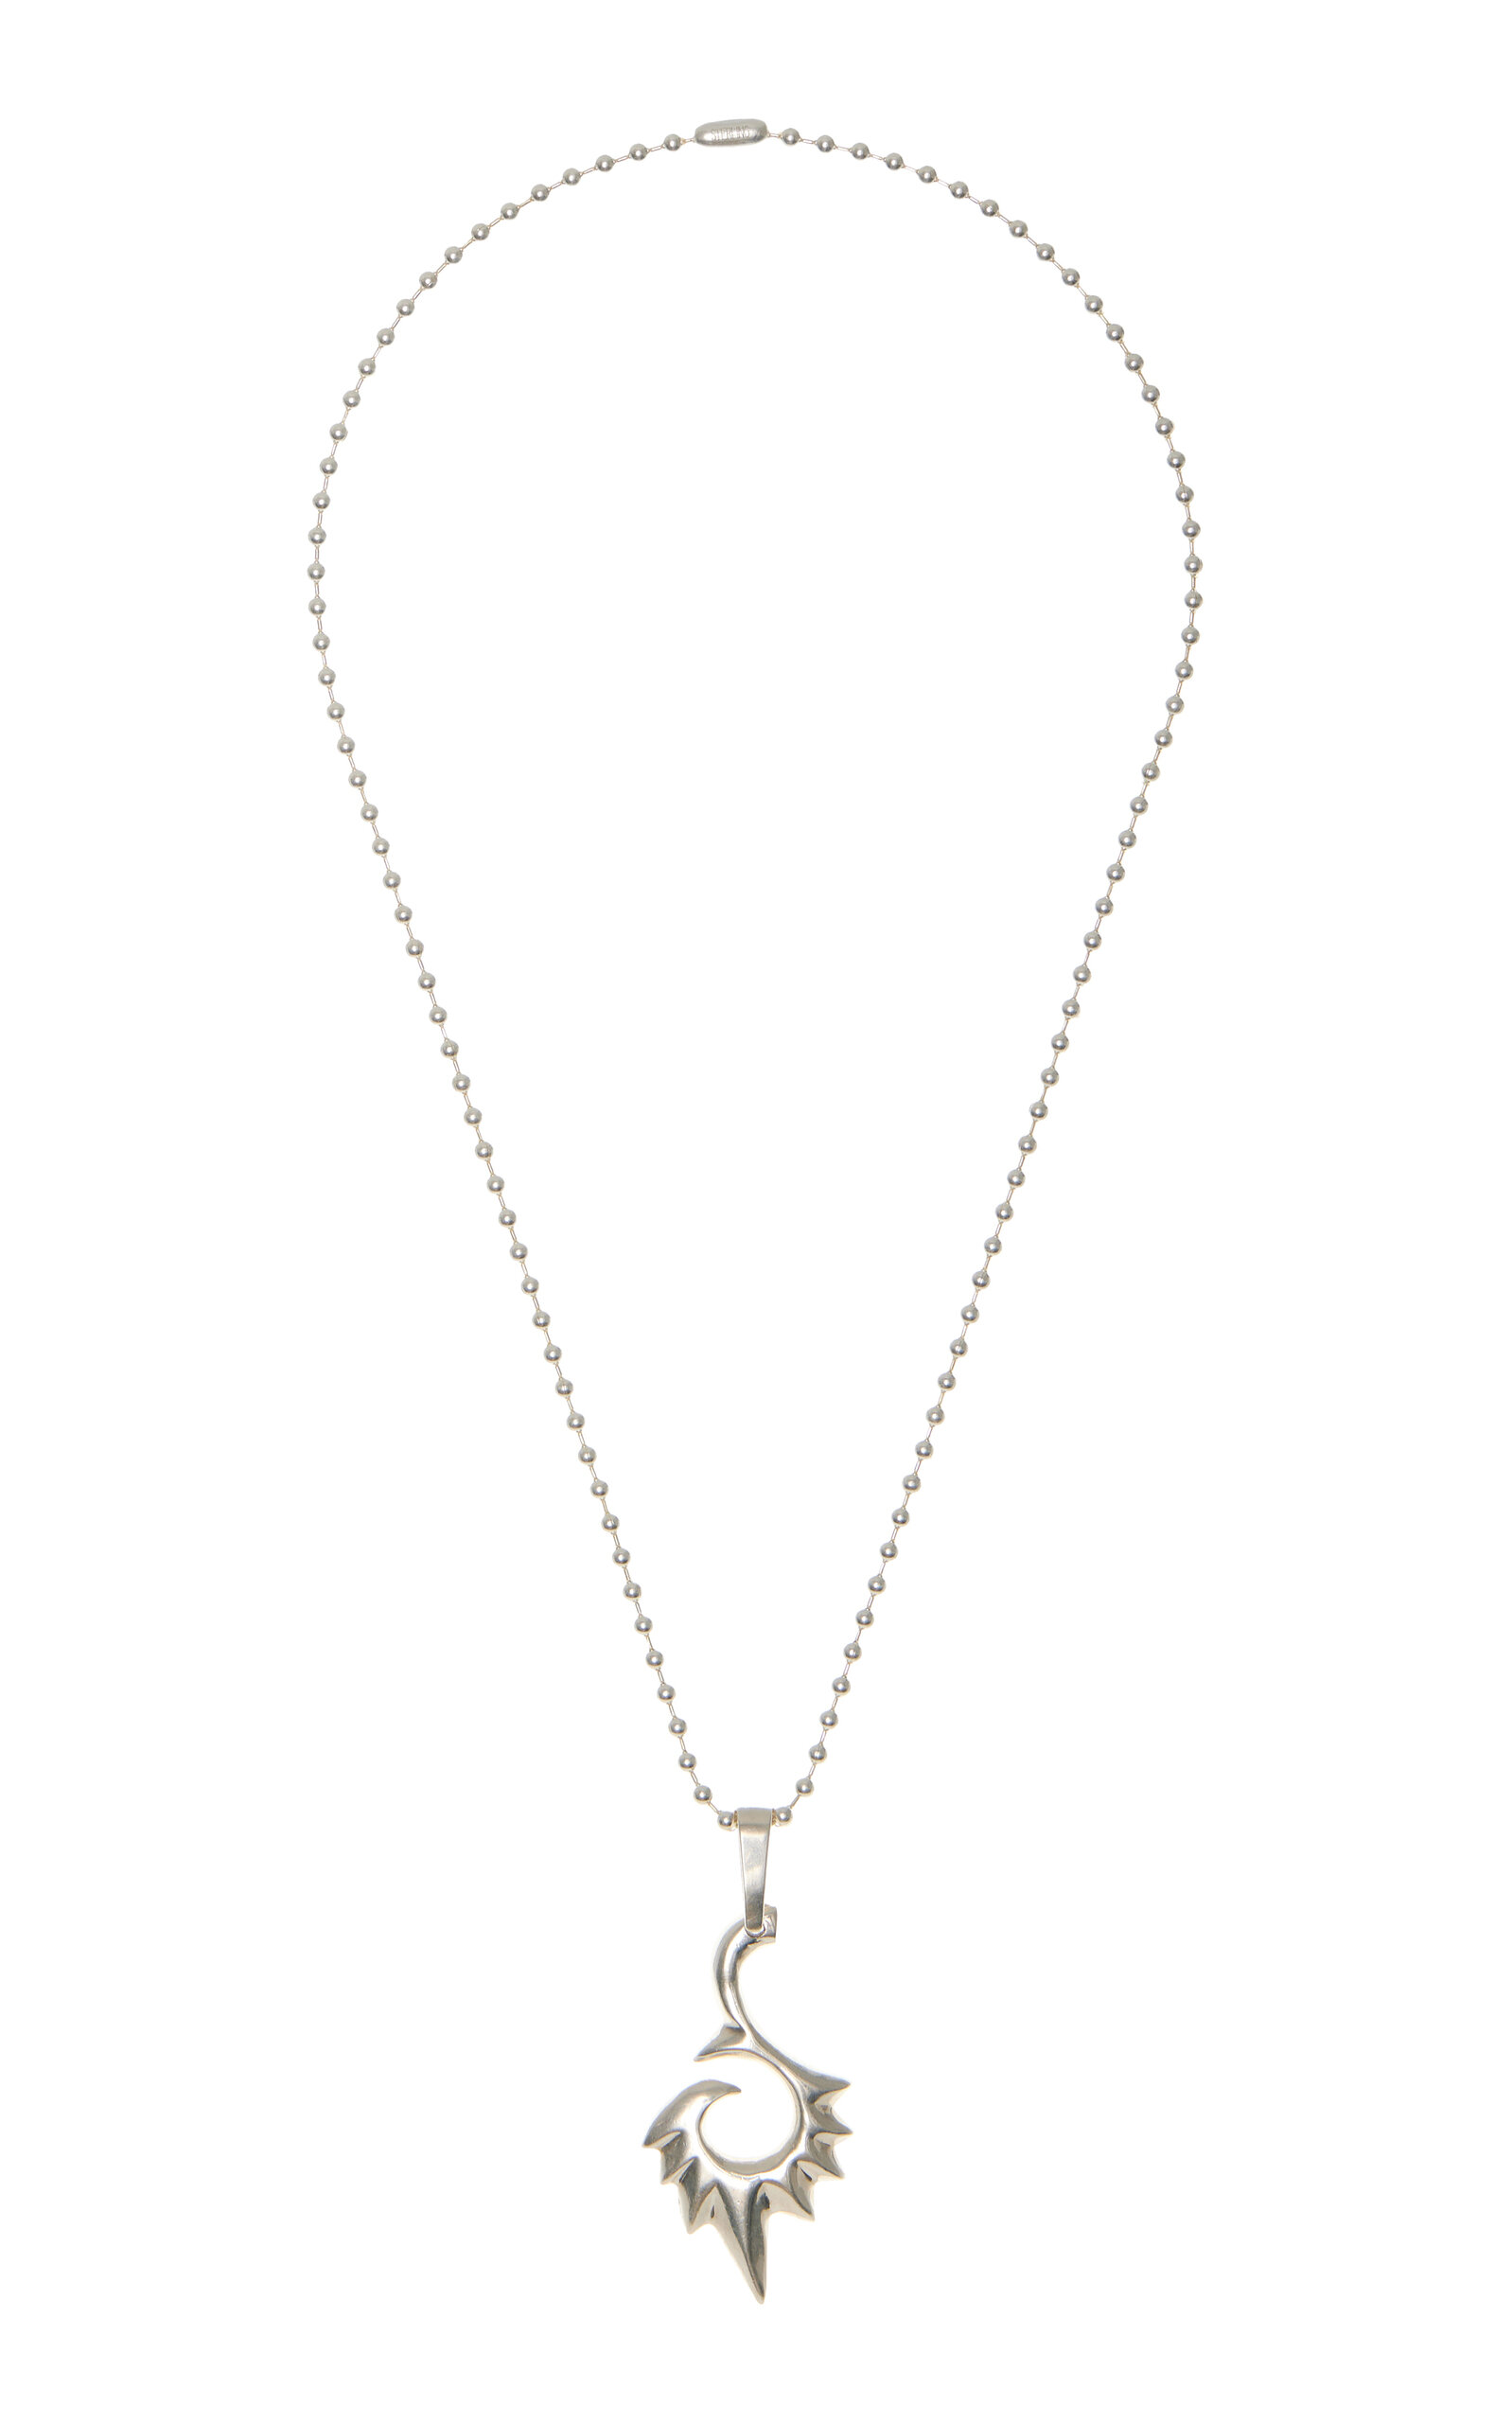 Martine Ali Exclusive Sunspot Sterling Silver Necklace In Metallic